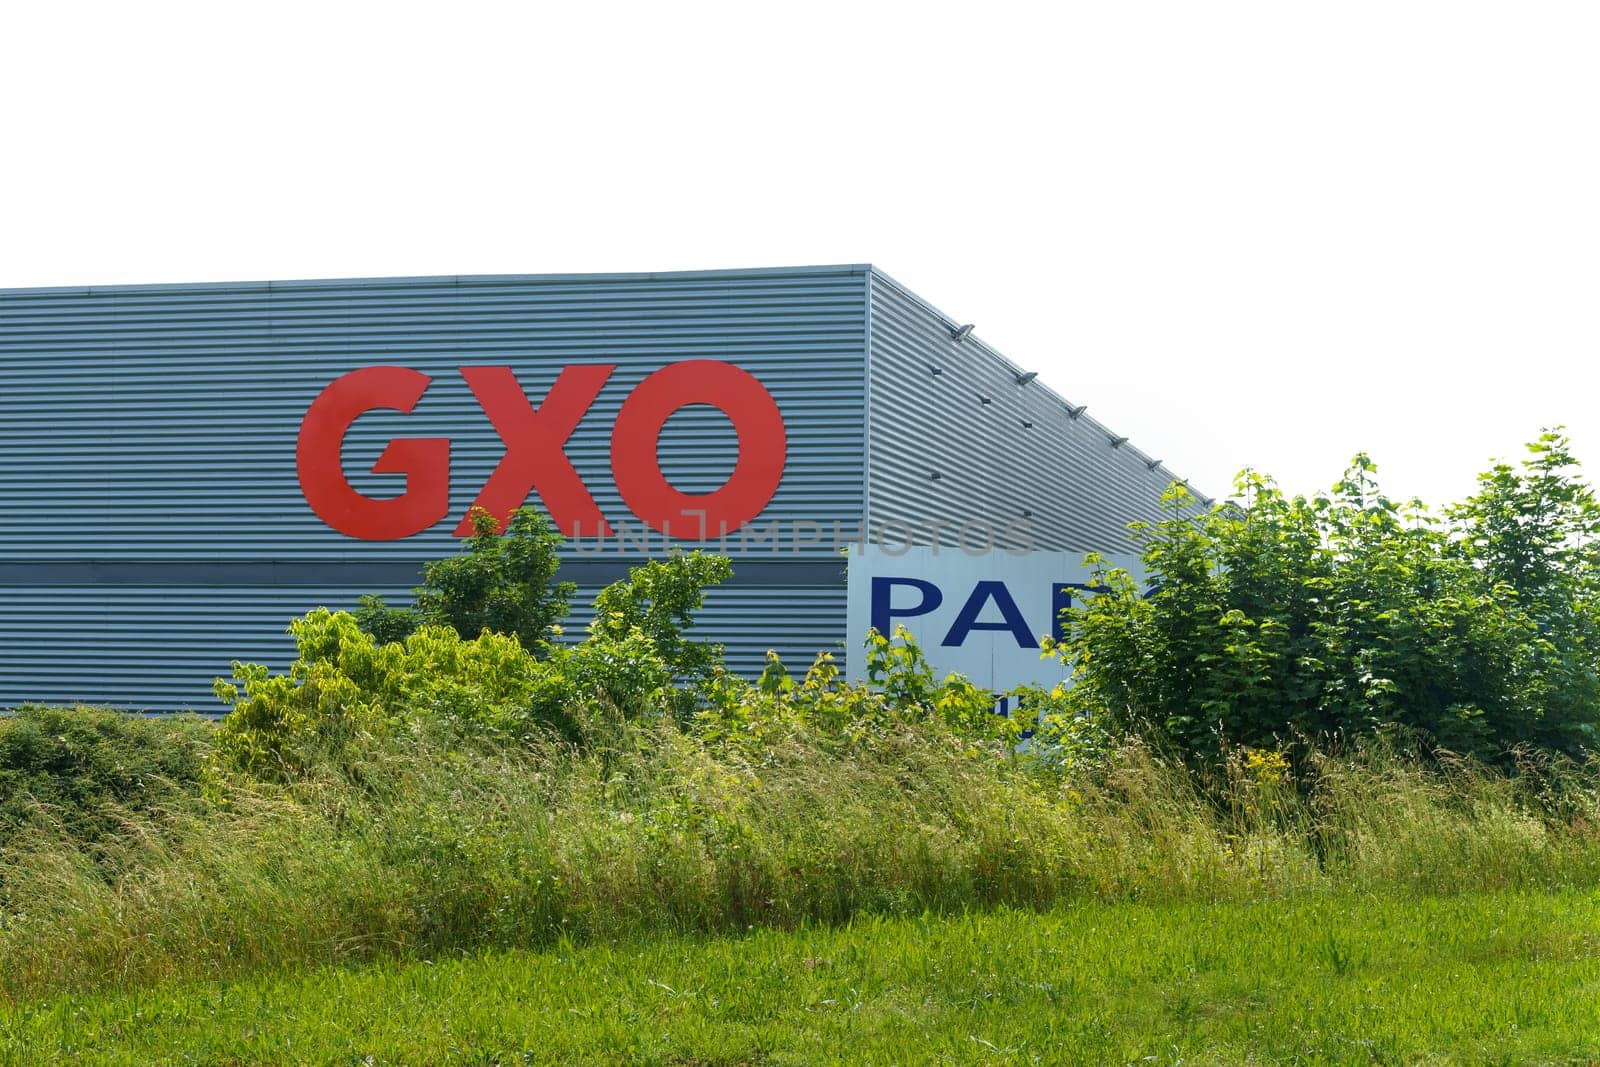 GXO Logistics Warehouse Exterior View On A Sunny Day With Clear Skies by Sd28DimoN_1976